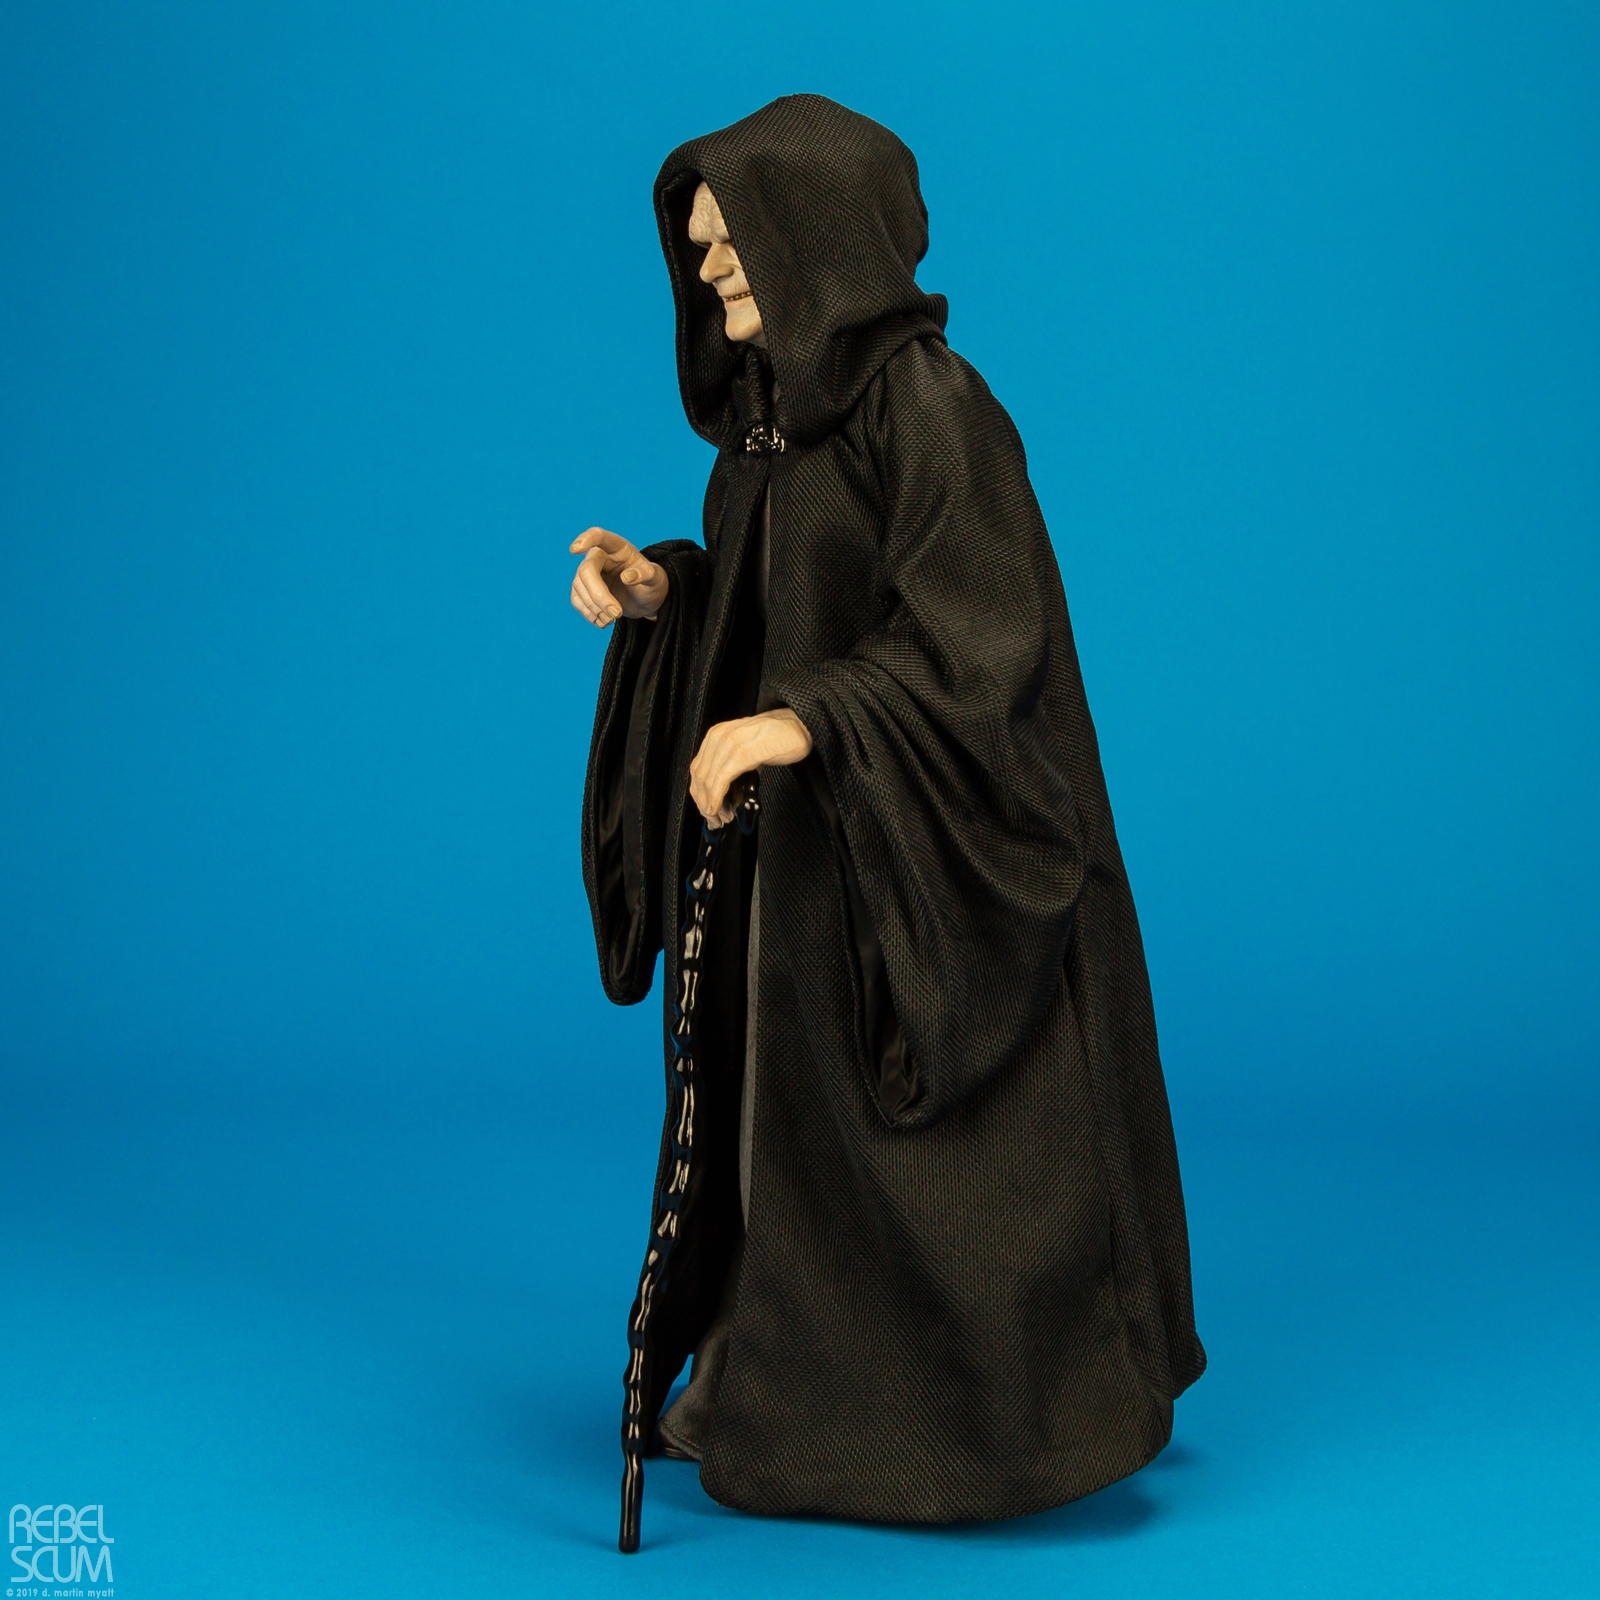 Emperor-Palpatine-Deluxe-Version-MMS468-Hot-Toys-003.jpg